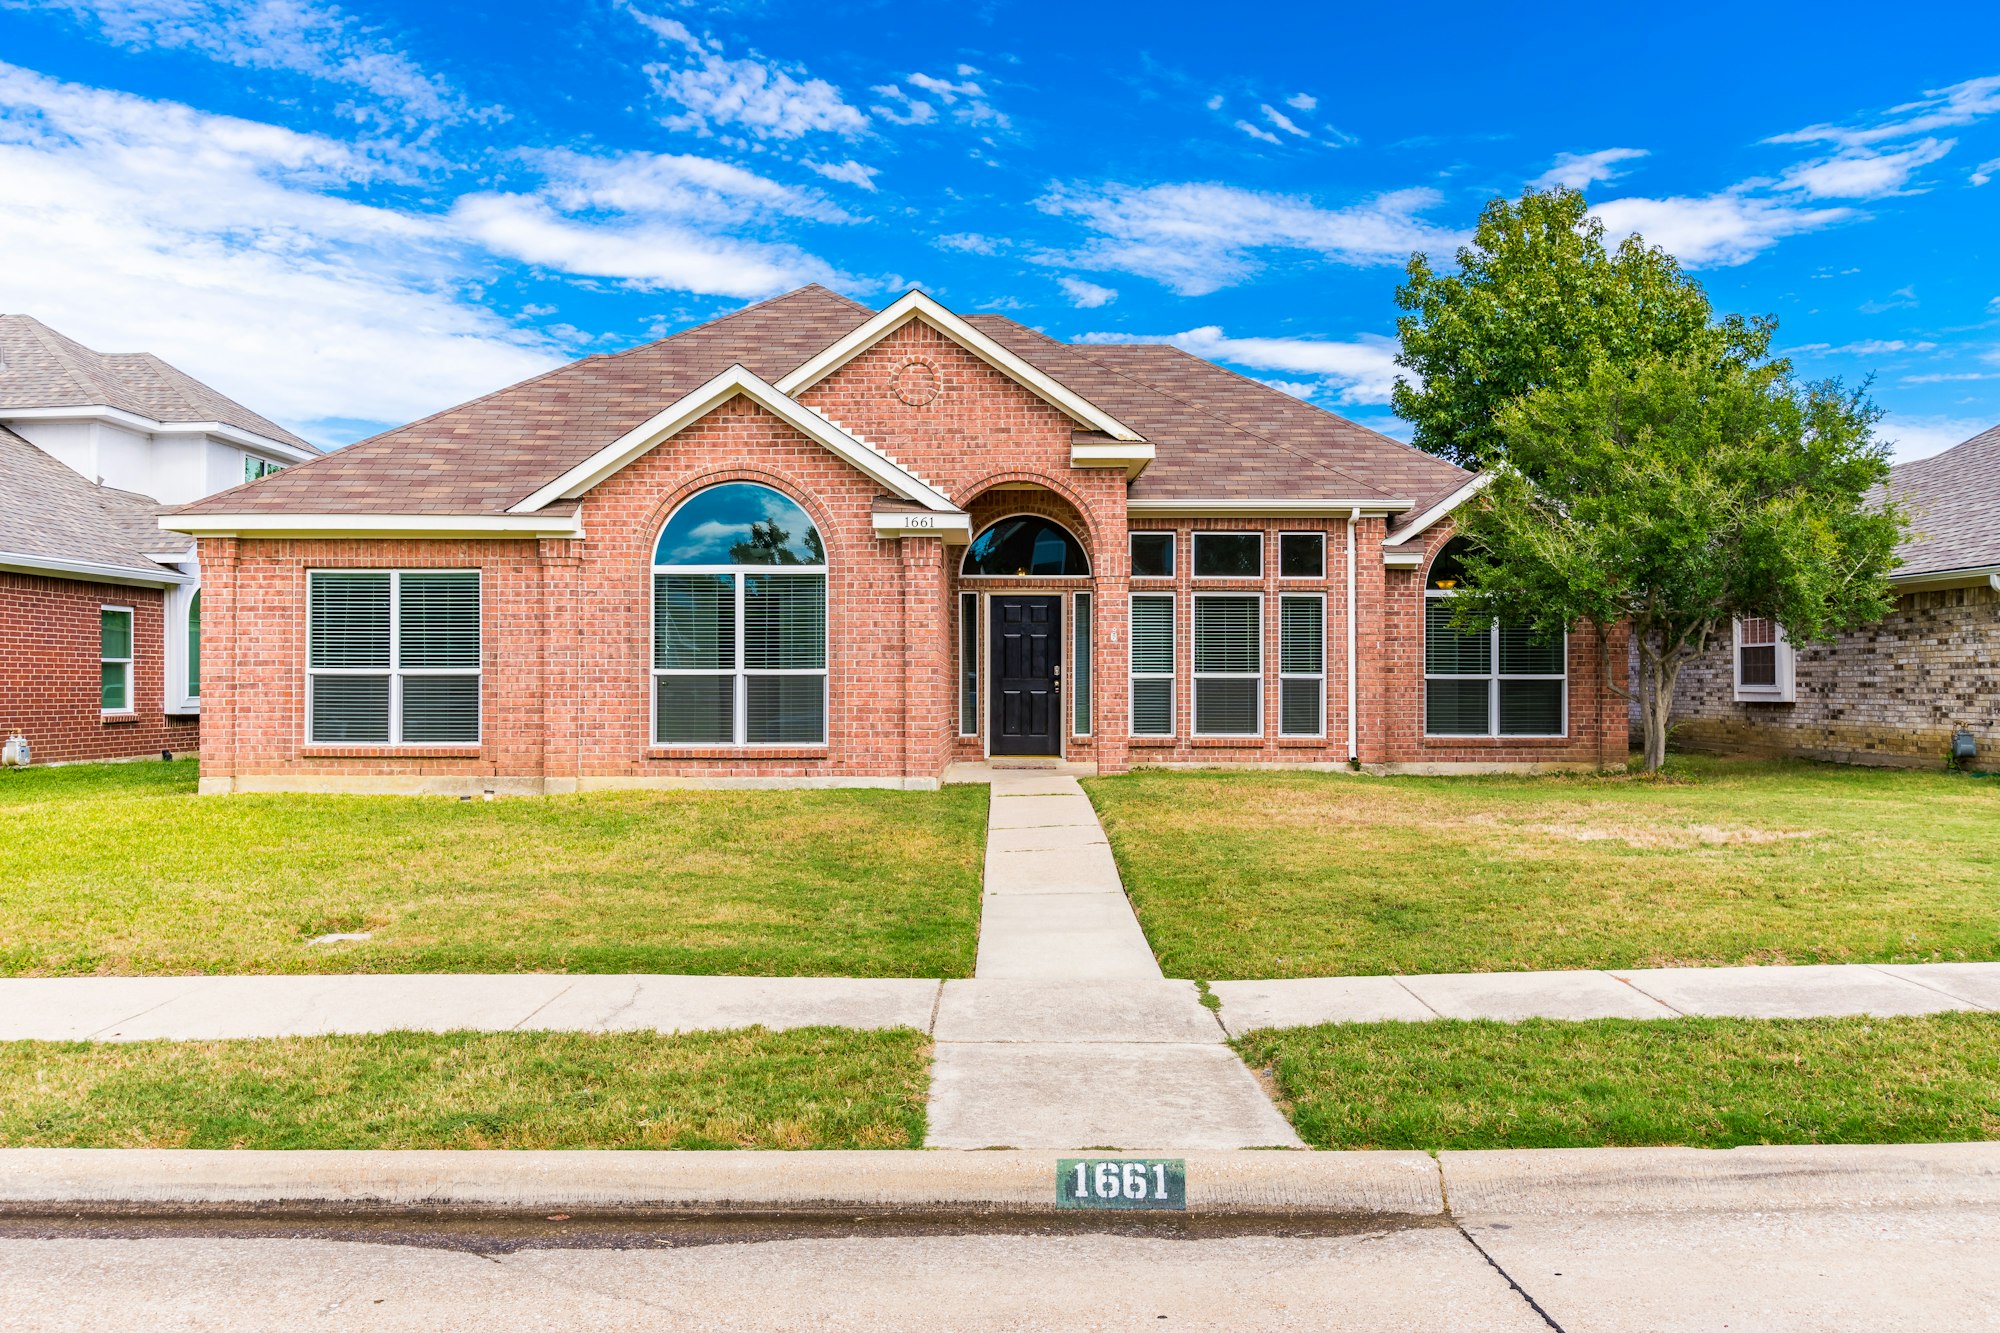 Photo 1 of 28 - 1661 Glenmore Dr, Lewisville, TX 75077